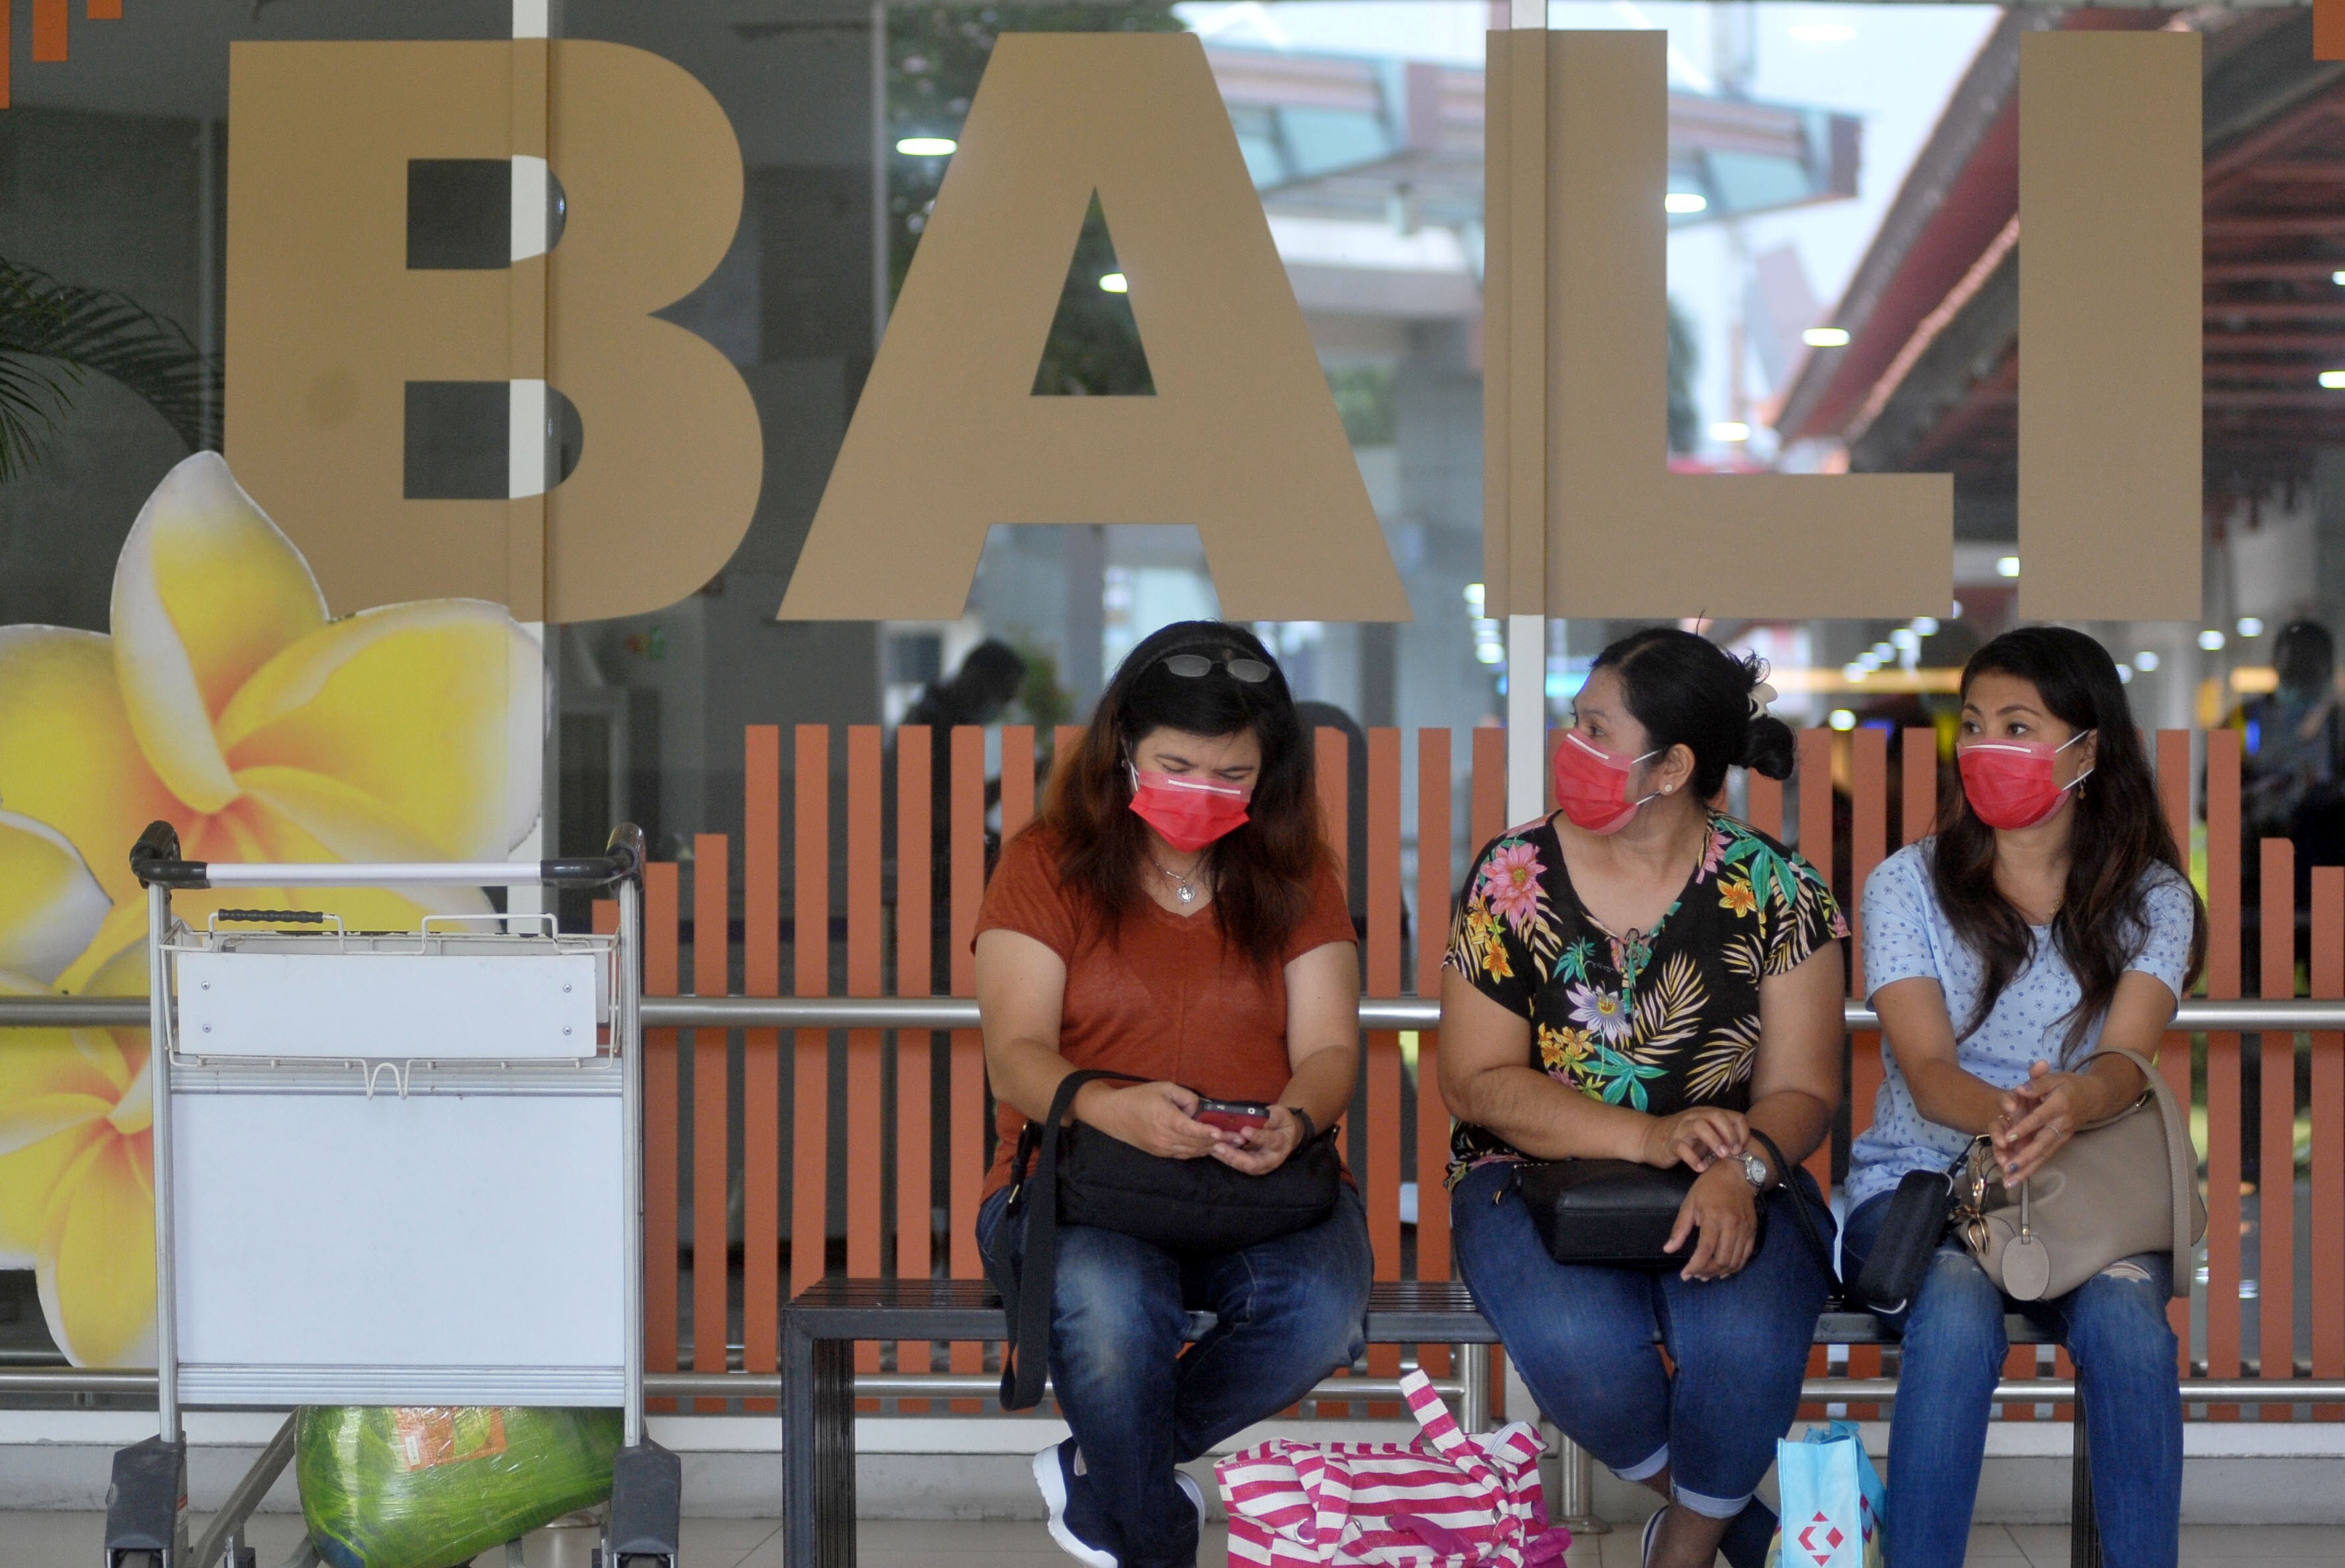 Measures against the coronavirus in Bali have been less stringent than in other areas of Indonesia. Photo: Reuters